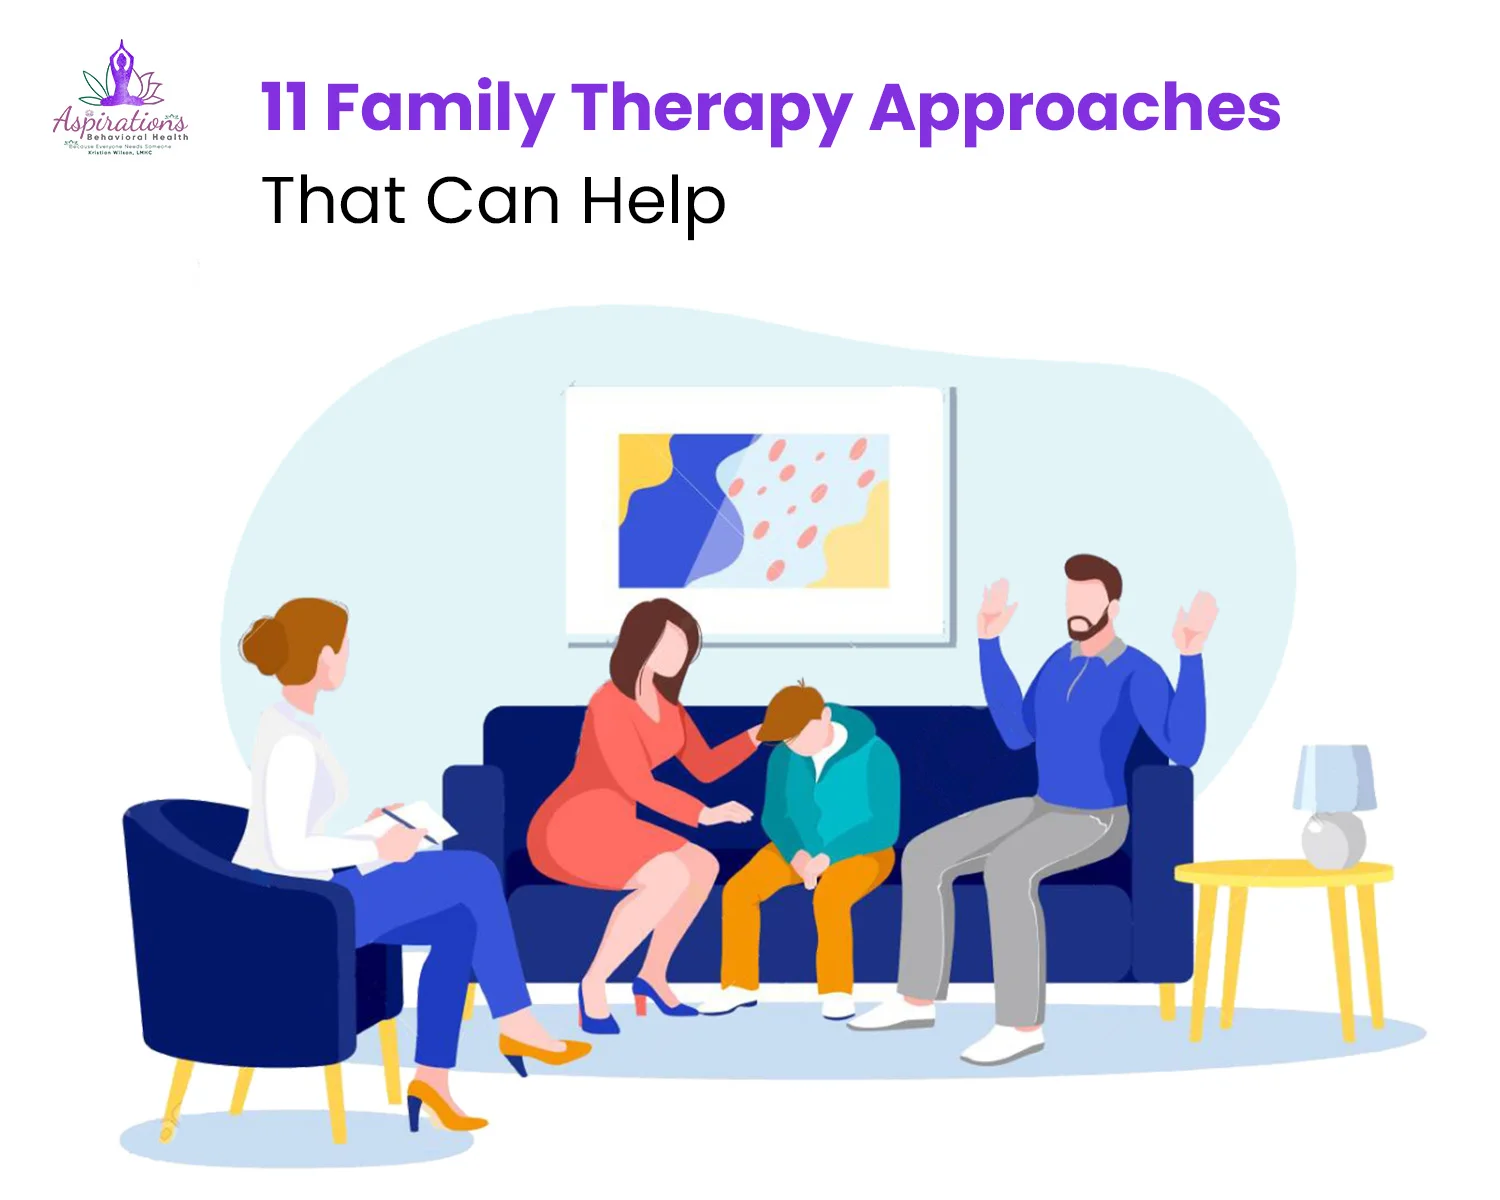 11 Family Therapy Approaches That Can Help